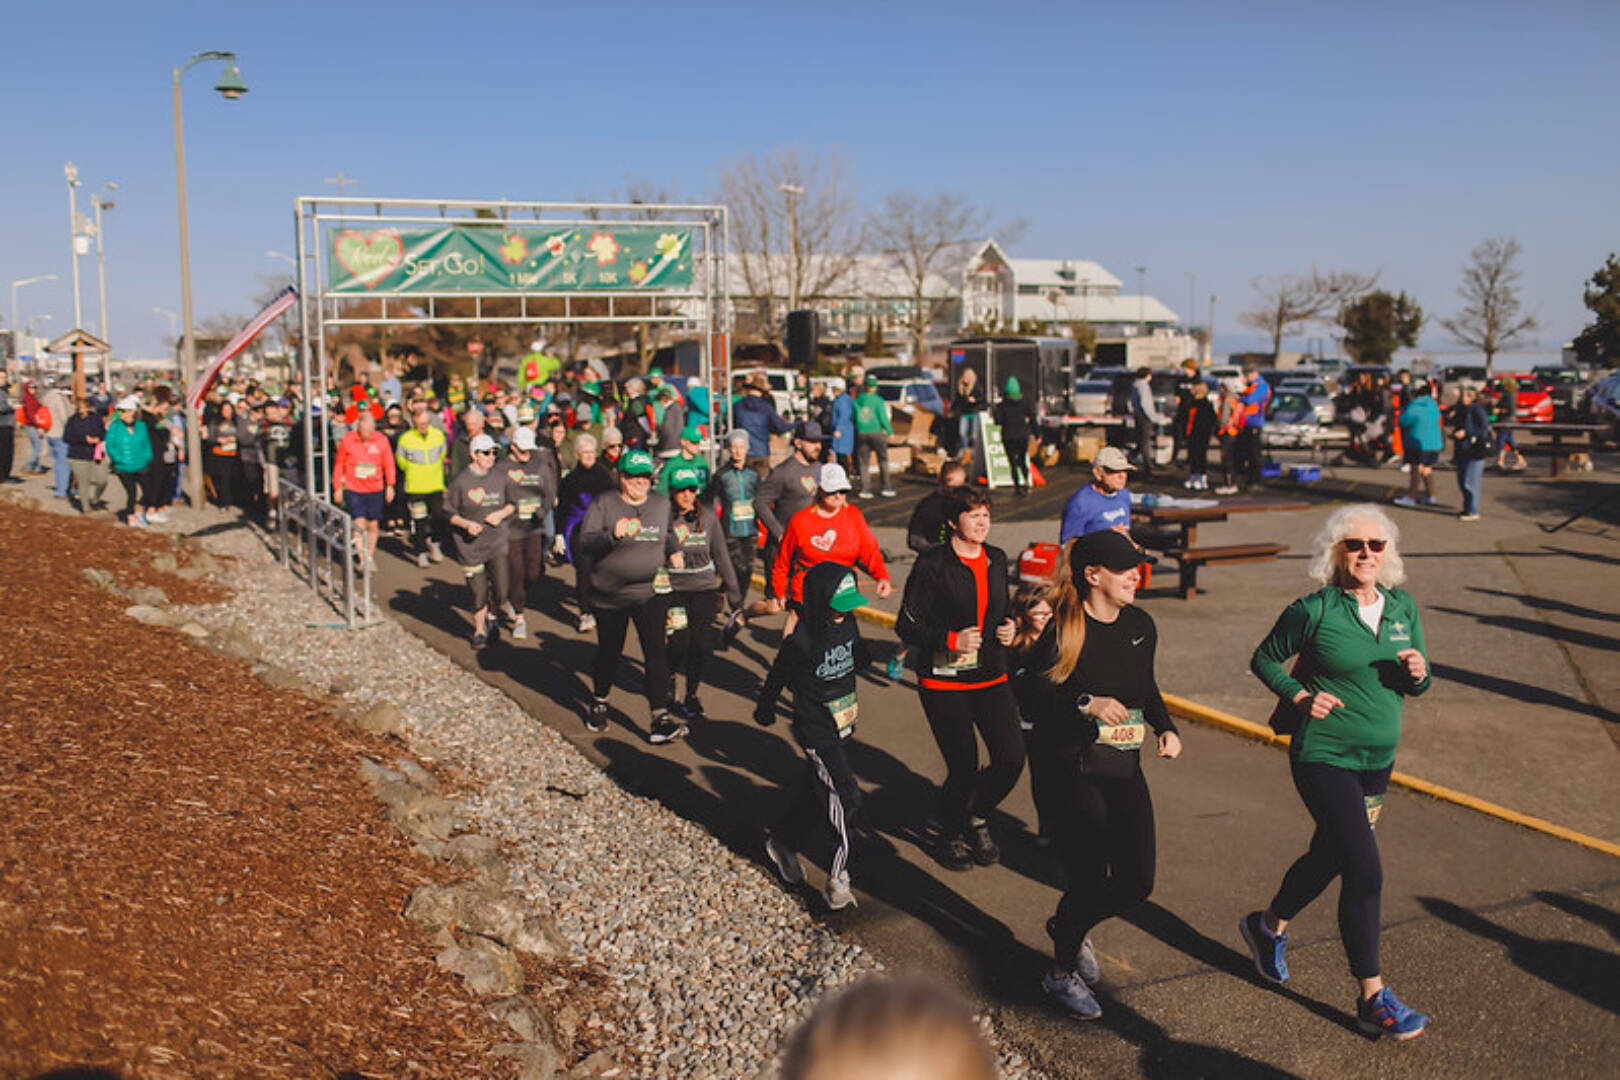 Lexi Winters photo Runners take off in the Red, Set Go St. Patrick’s Day run/walk races held in Port Angeles this weekend.